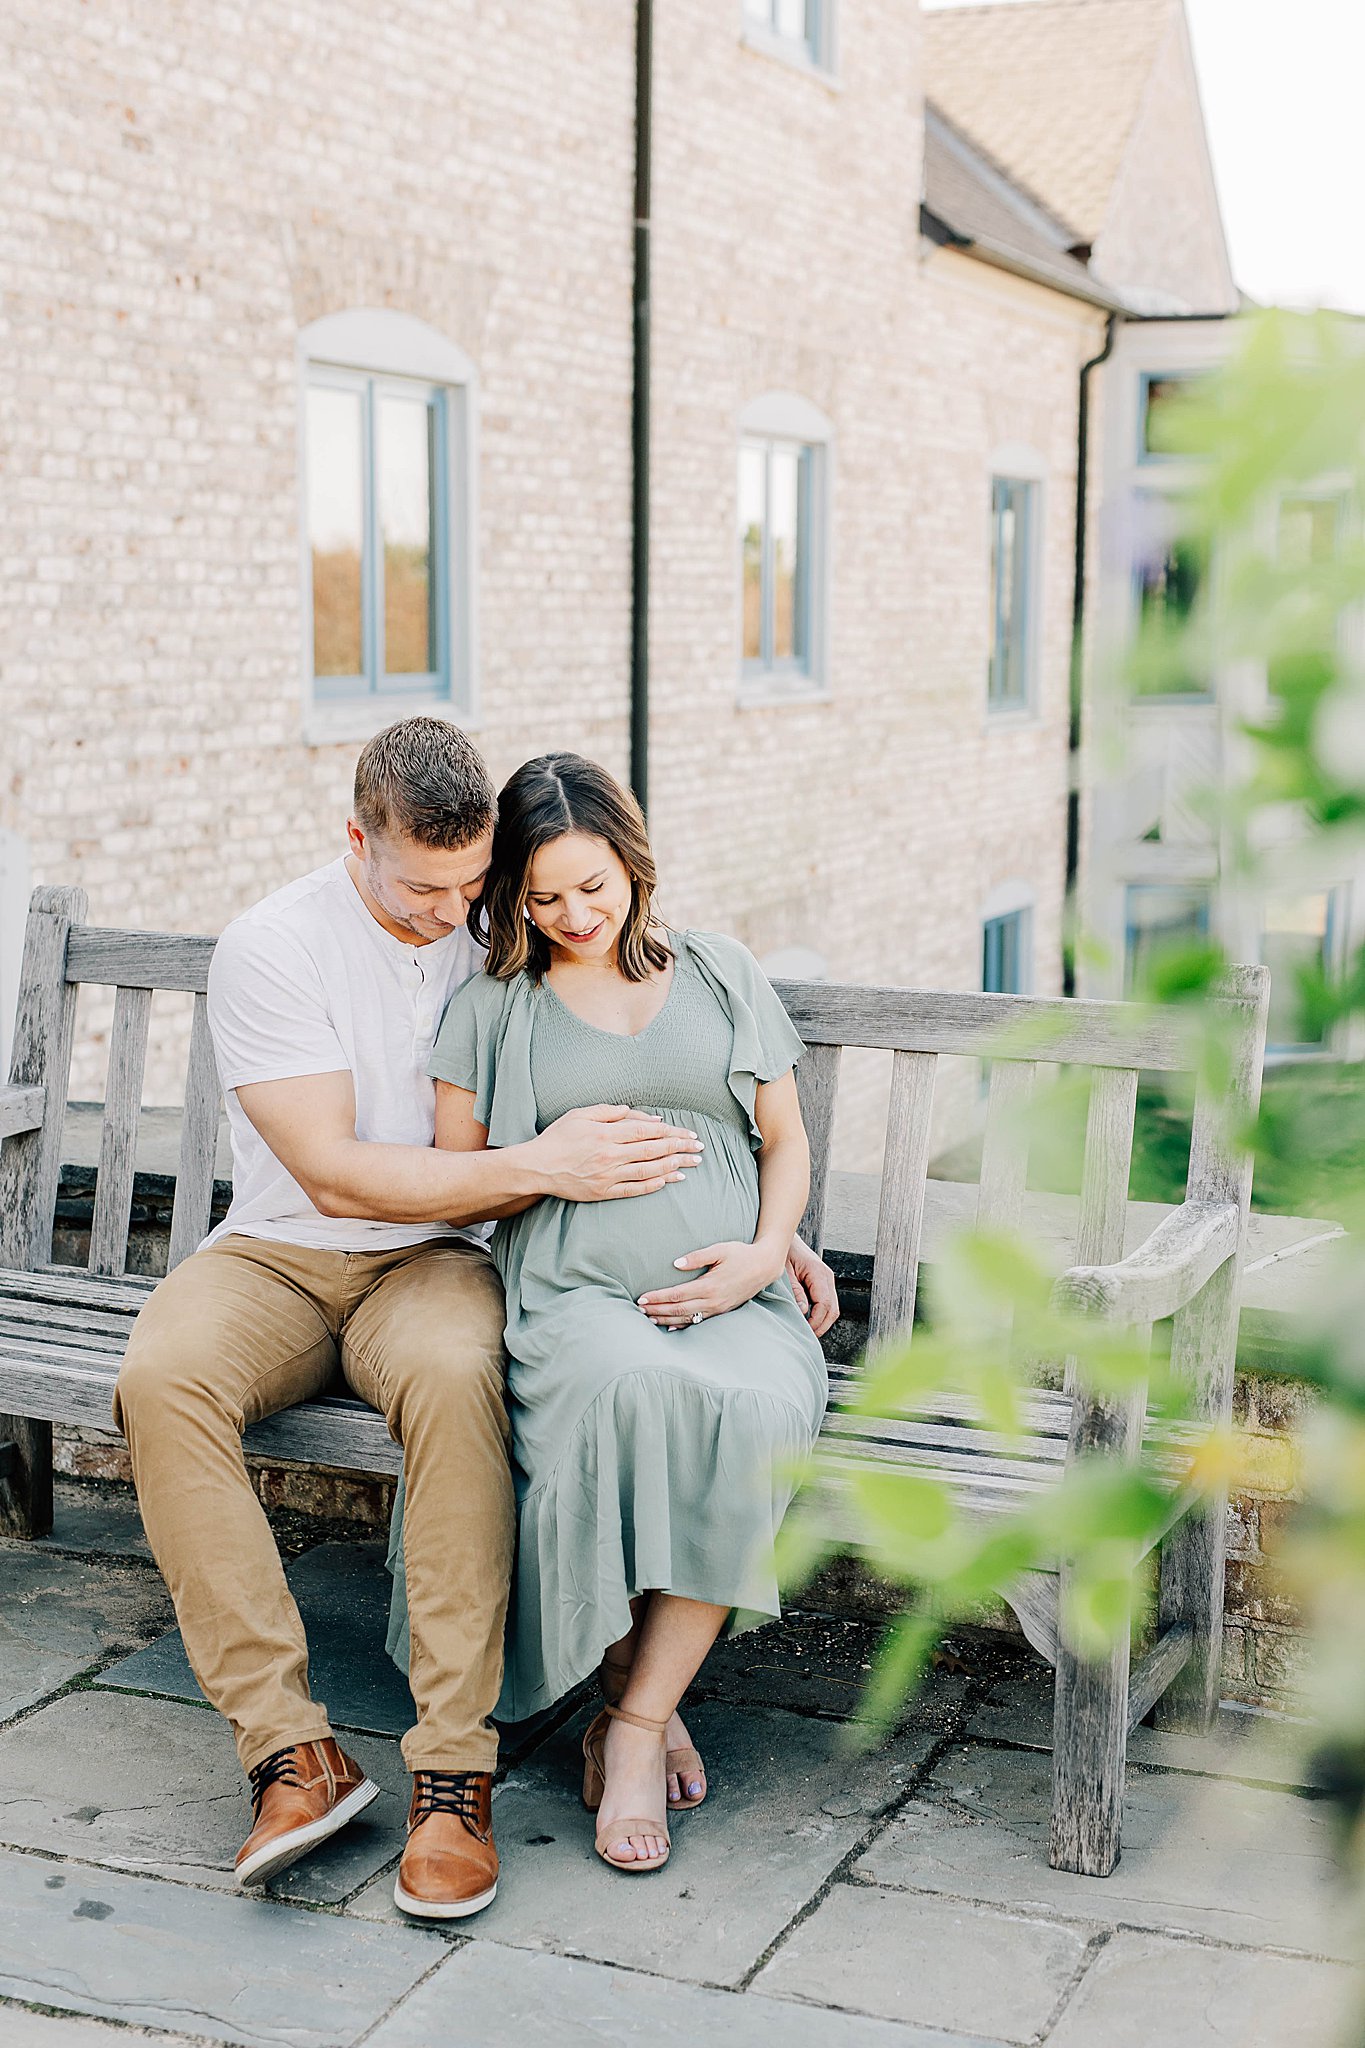 Dad touching mom's baby bump during maternity photos